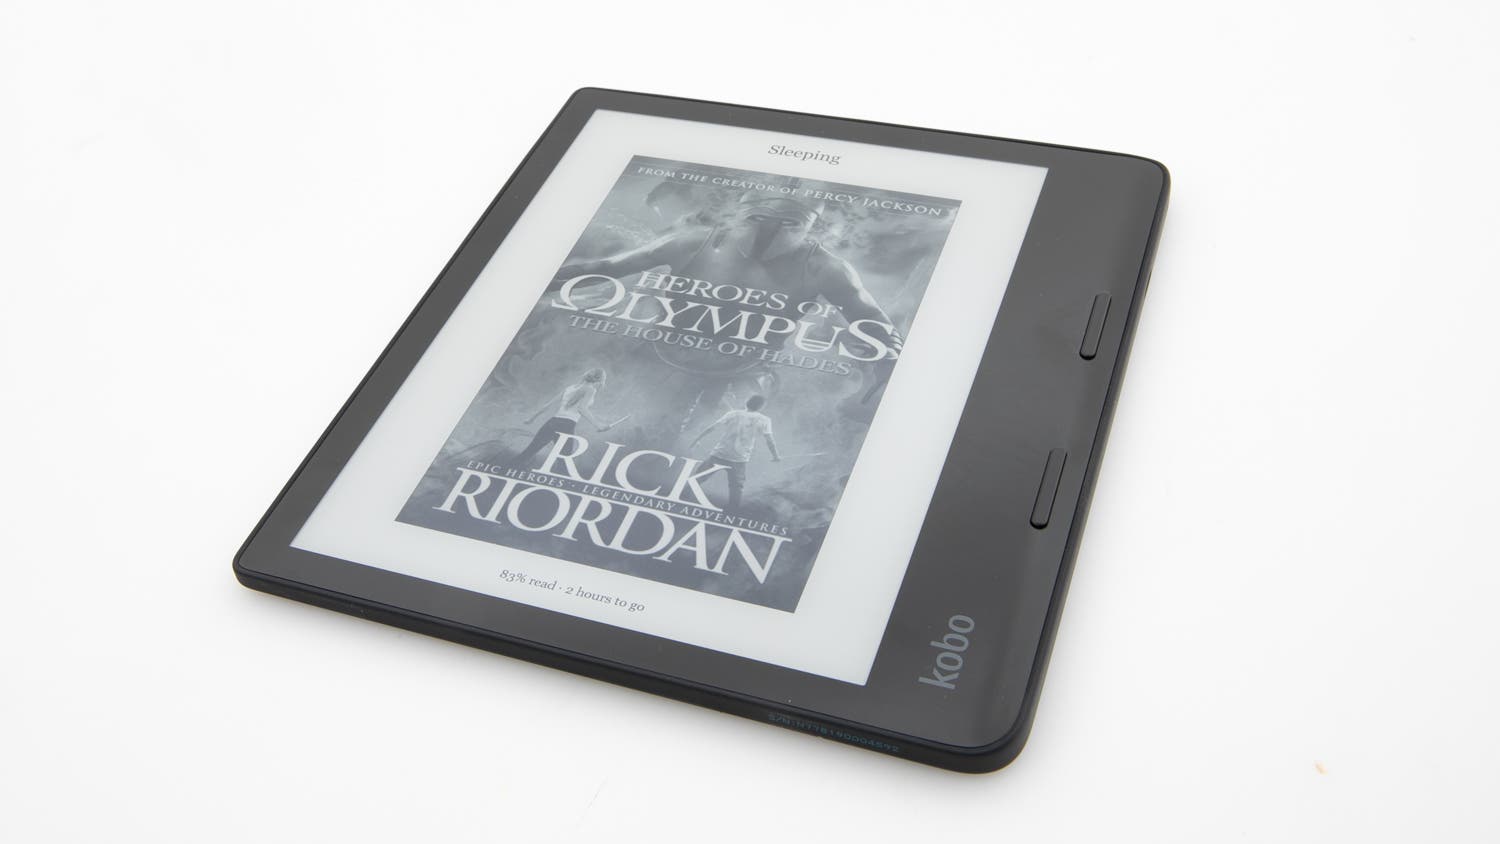 The best ebook reader to buy right now